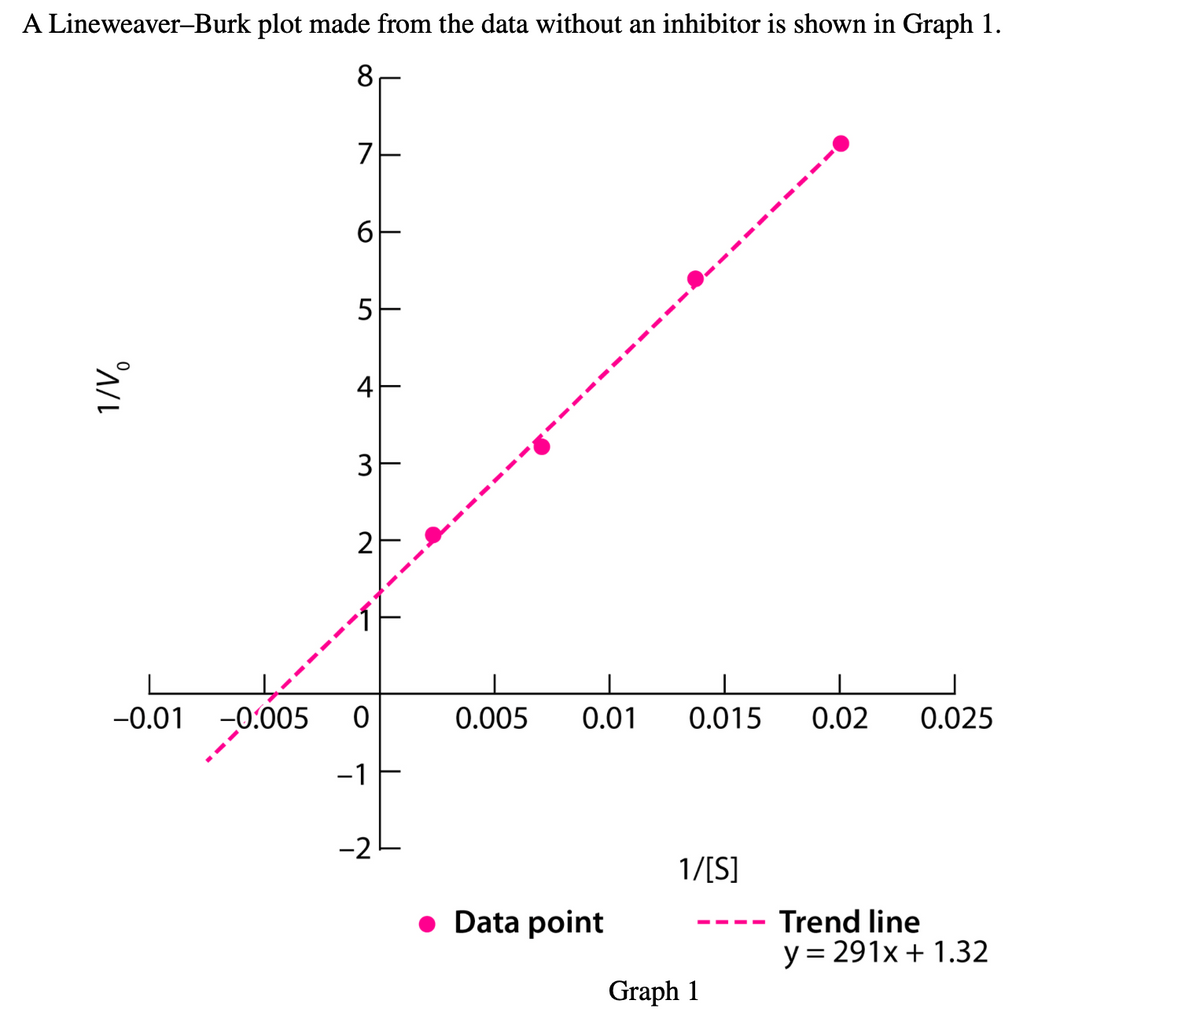 A Lineweaver-Burk plot made from the data without an inhibitor is shown in Graph 1.
8
1/V/
X-
7
6
LO
5
4
3+
2
-0.01 -0.005 0
-1
-2
-f
0.005
0.01
● Data point
0.015 0.02 0.025
1/[S]
Graph 1
Trend line
y = 291x + 1.32